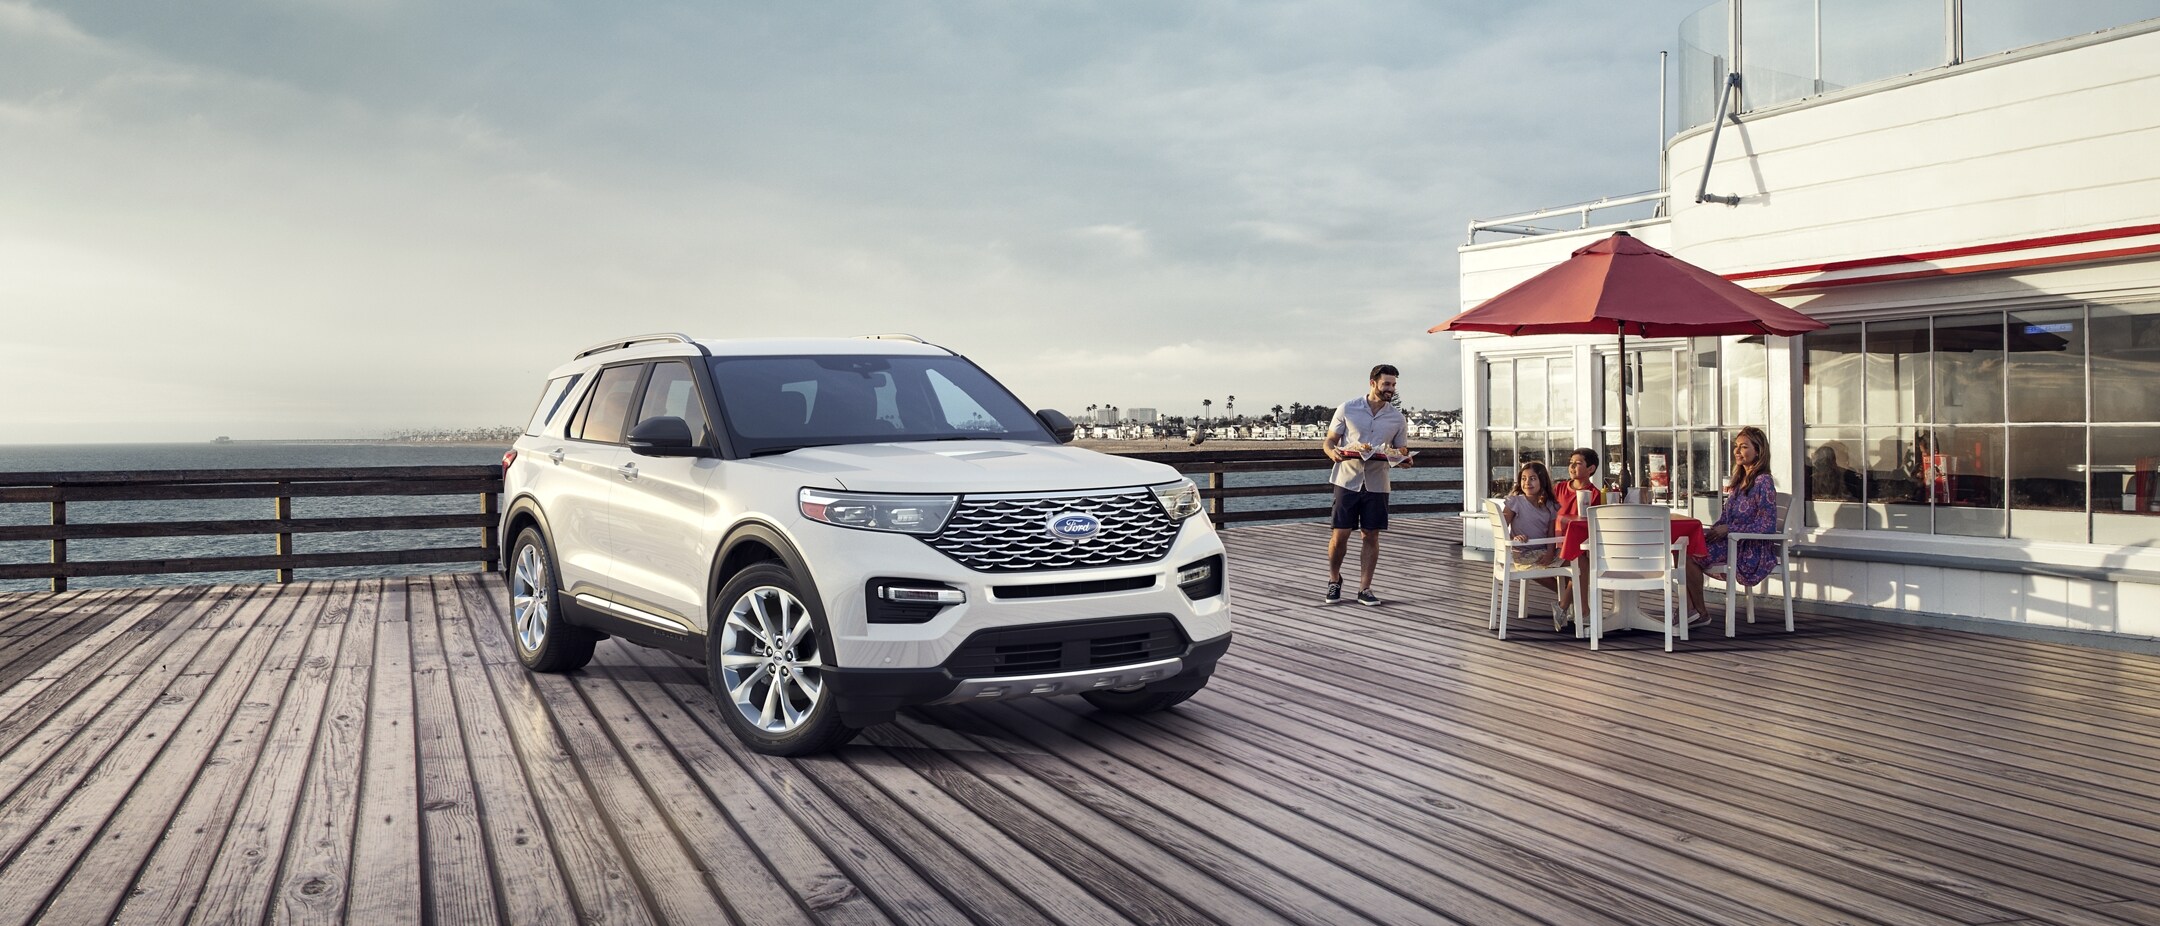 https://www.ford.com/is/image/content/dam/vdm_ford/live/en_us/ford/nameplate/explorer/2021/collections/dm/20_FRD_EPR_400084_219_fade.tif?croppathe=1_21x9&wid=2160